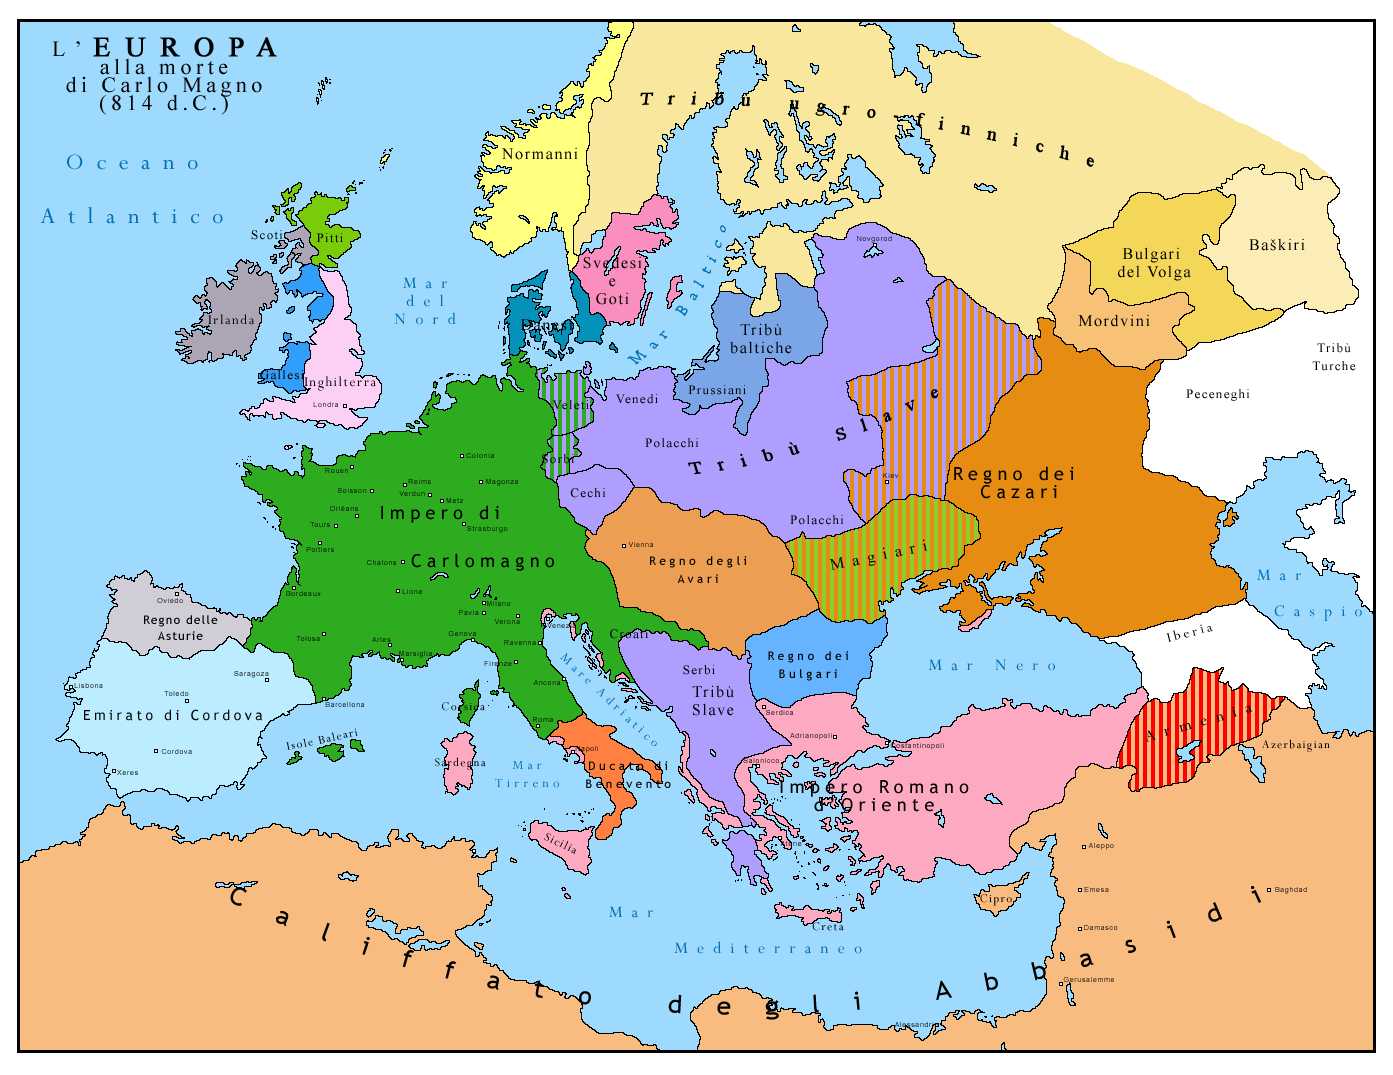 The Crusades Map Worksheet Answers Along with File Europa 814